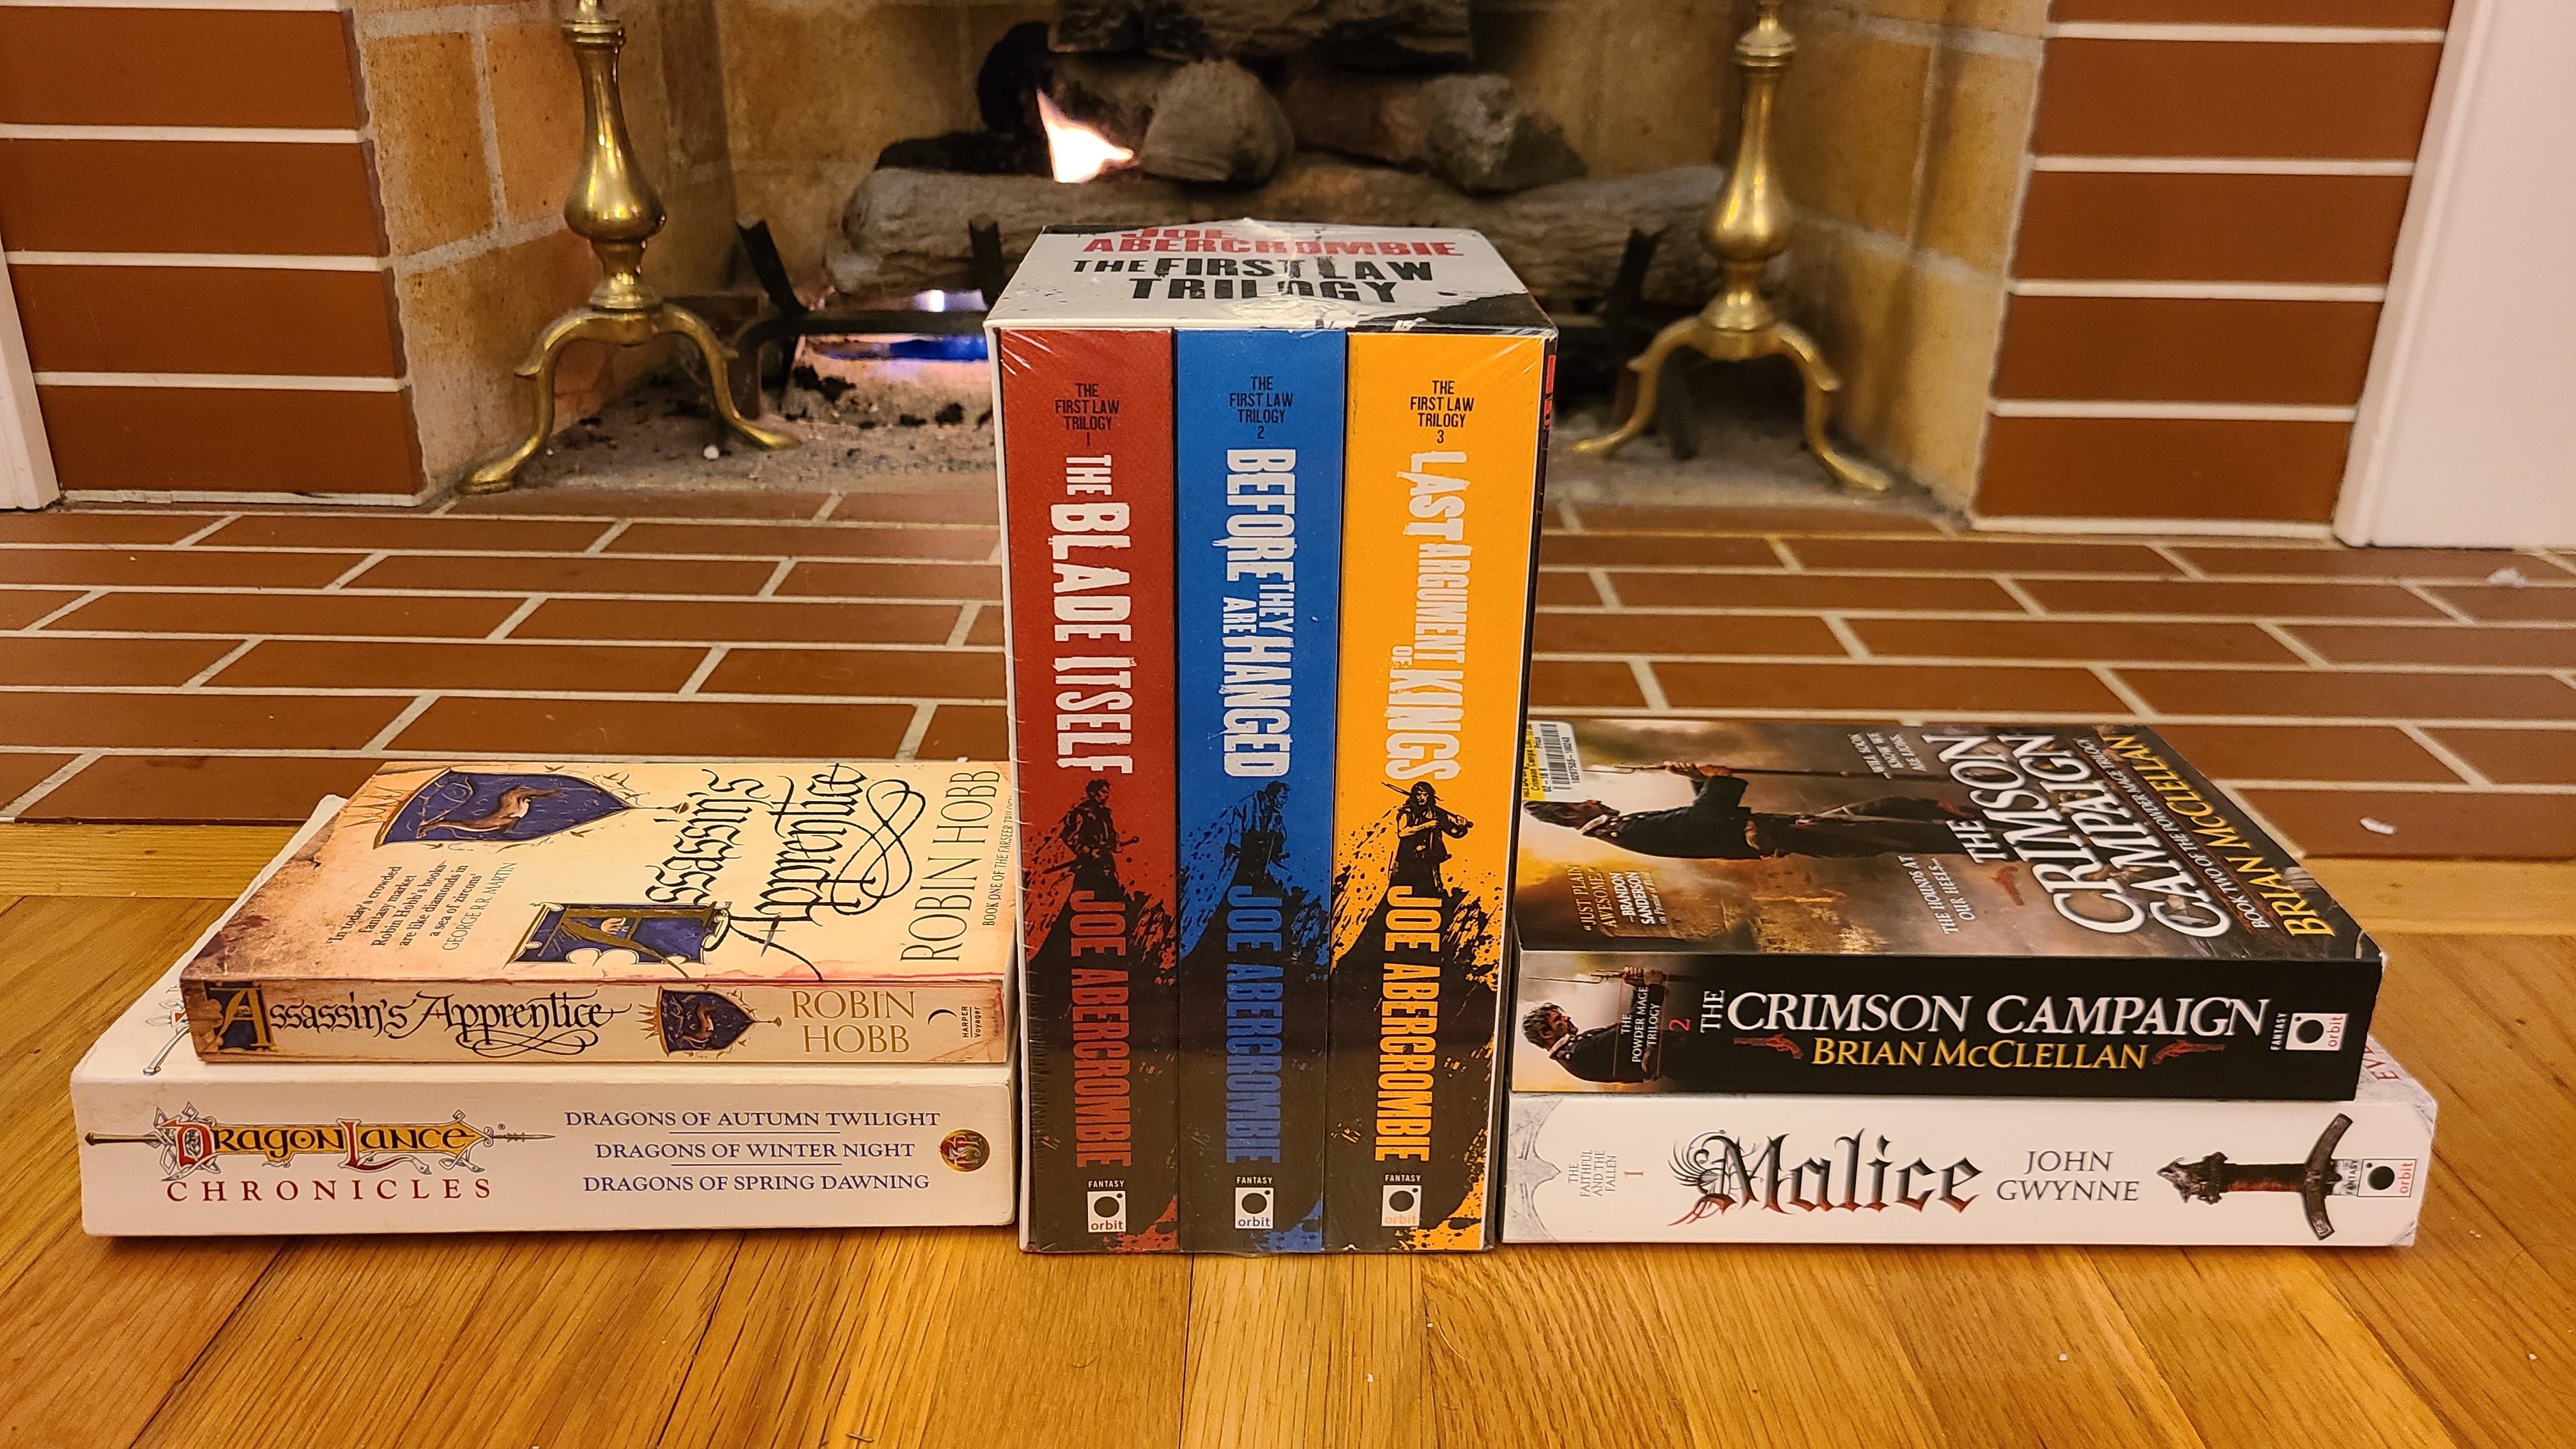 Pic of books in front of fireplace. Includes Assassin's Apprentice, Dragonlance Chronicles, The First Law Trilogy, The Crimson Campaign, and Malice